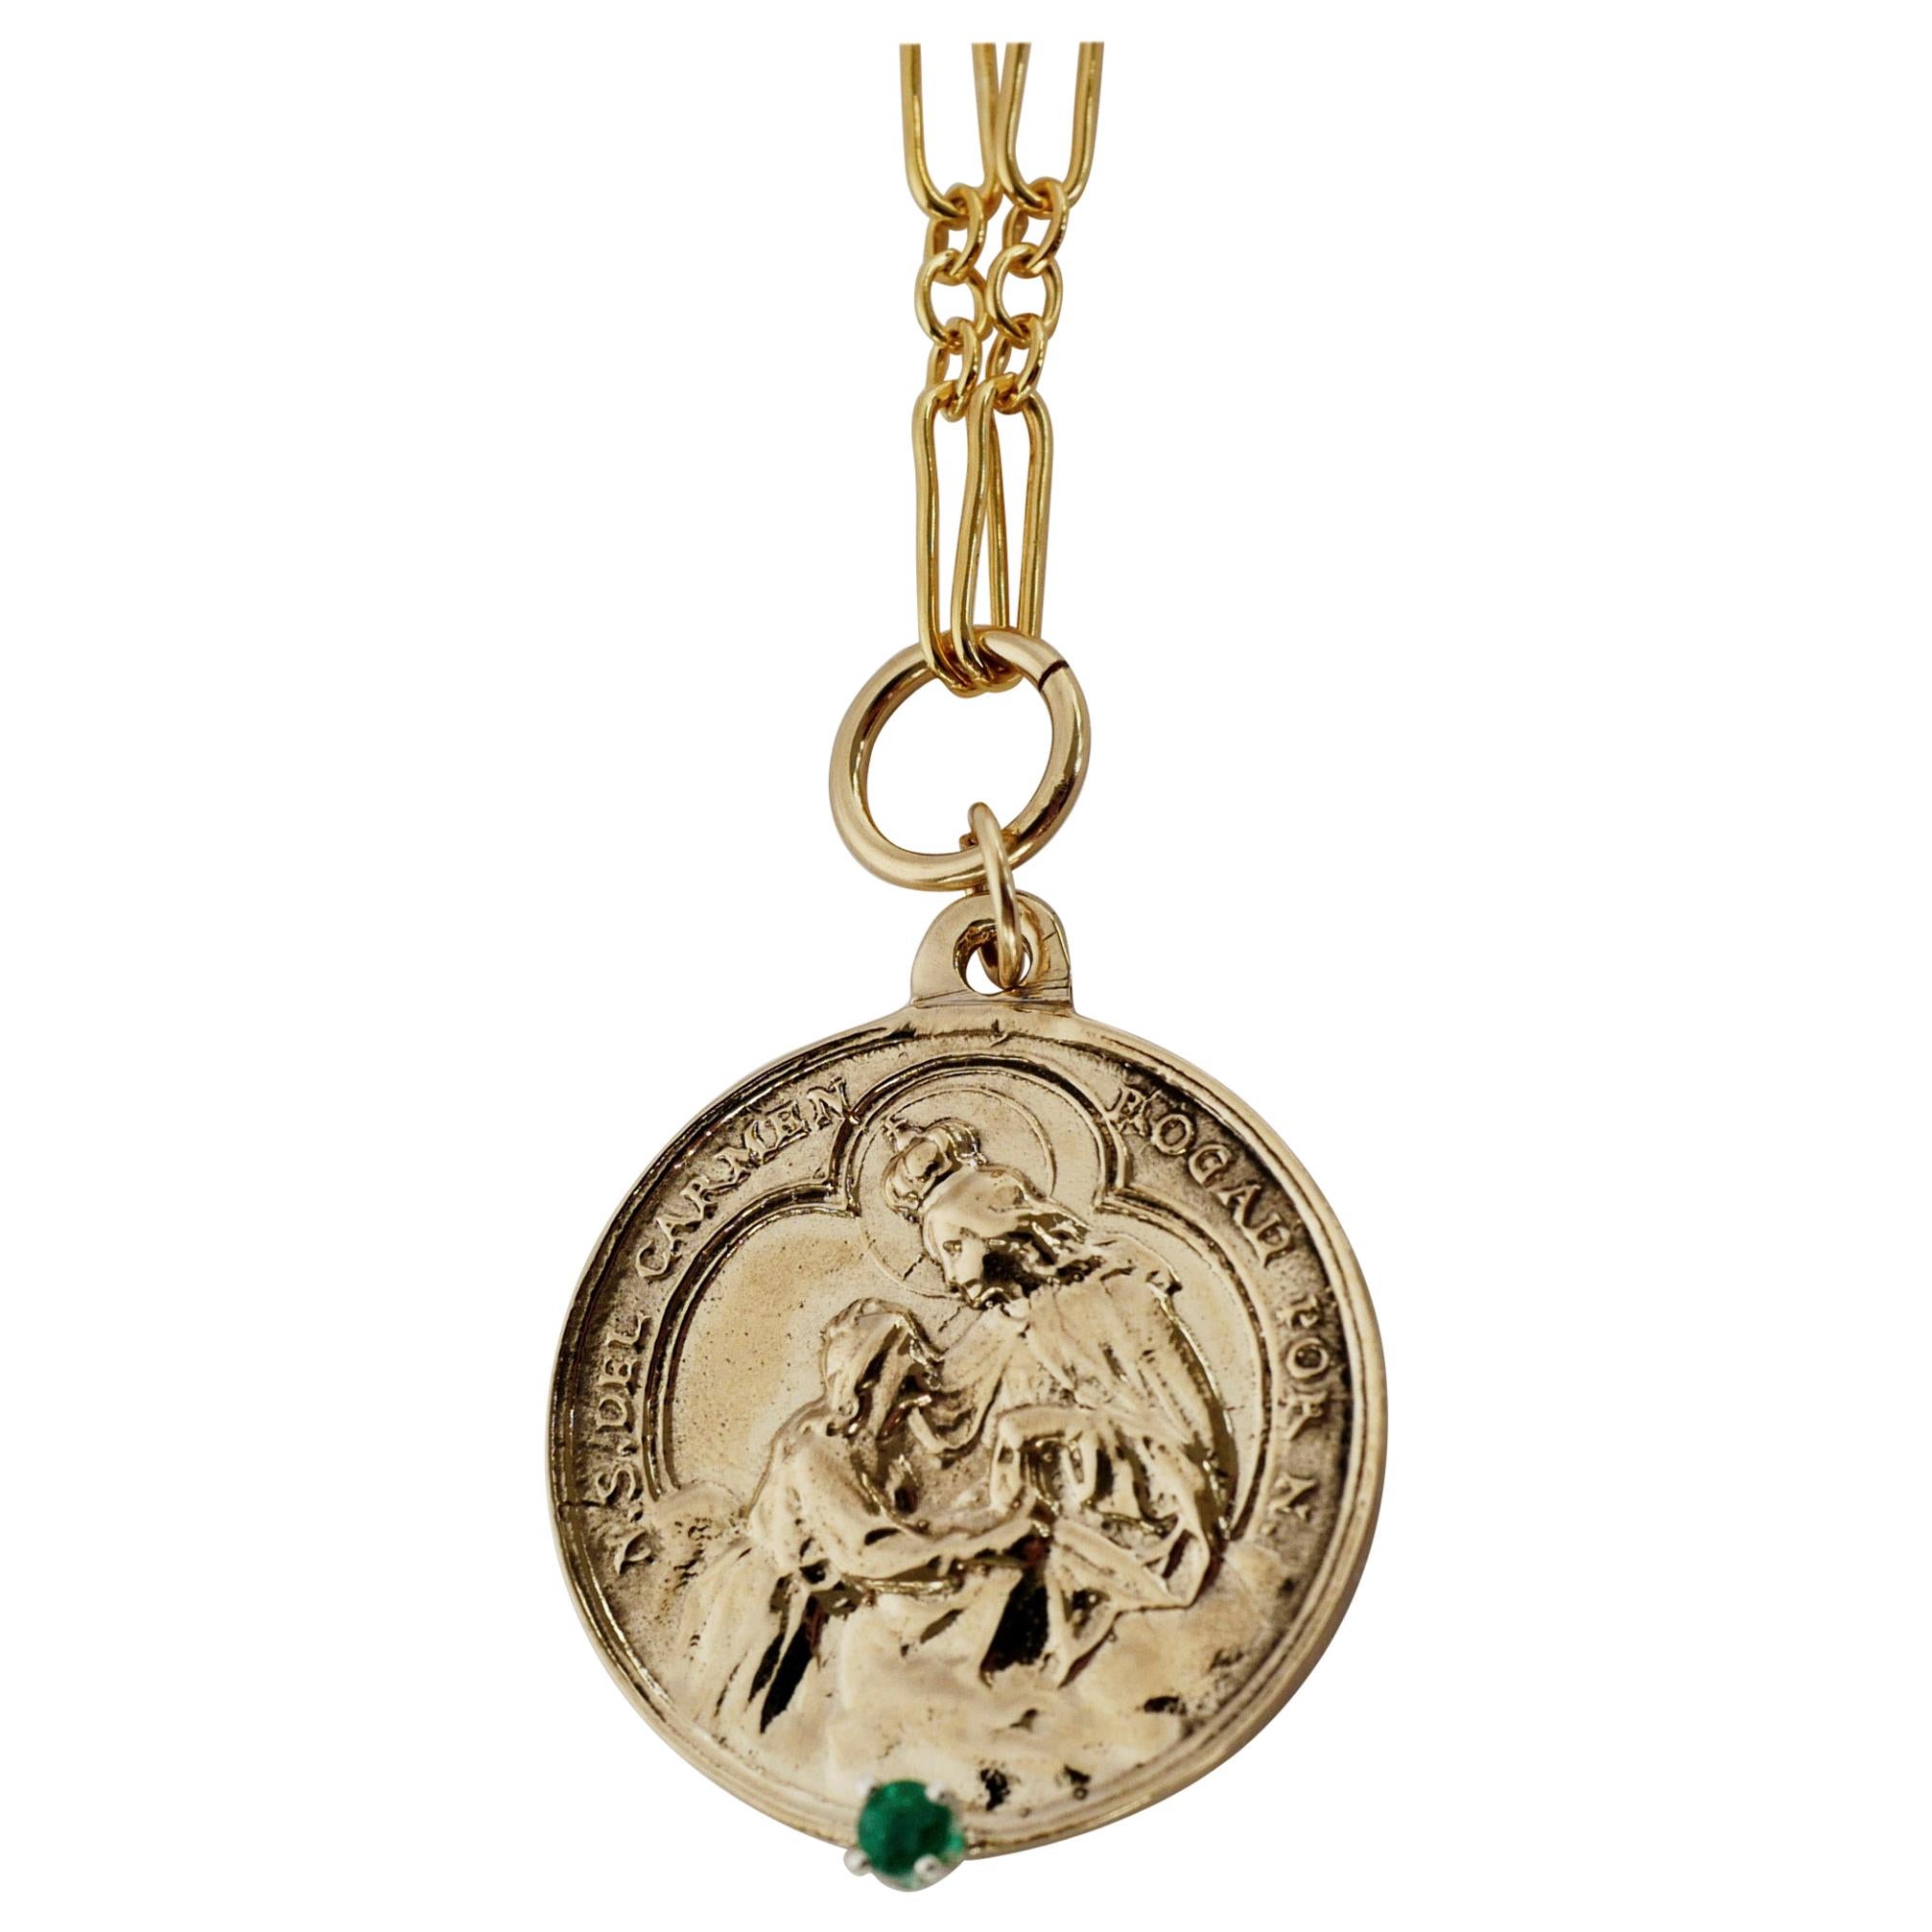 Emerald Virgin Mother Mary Medal Chunky Chain Necklace Gold J Dauphin For Sale